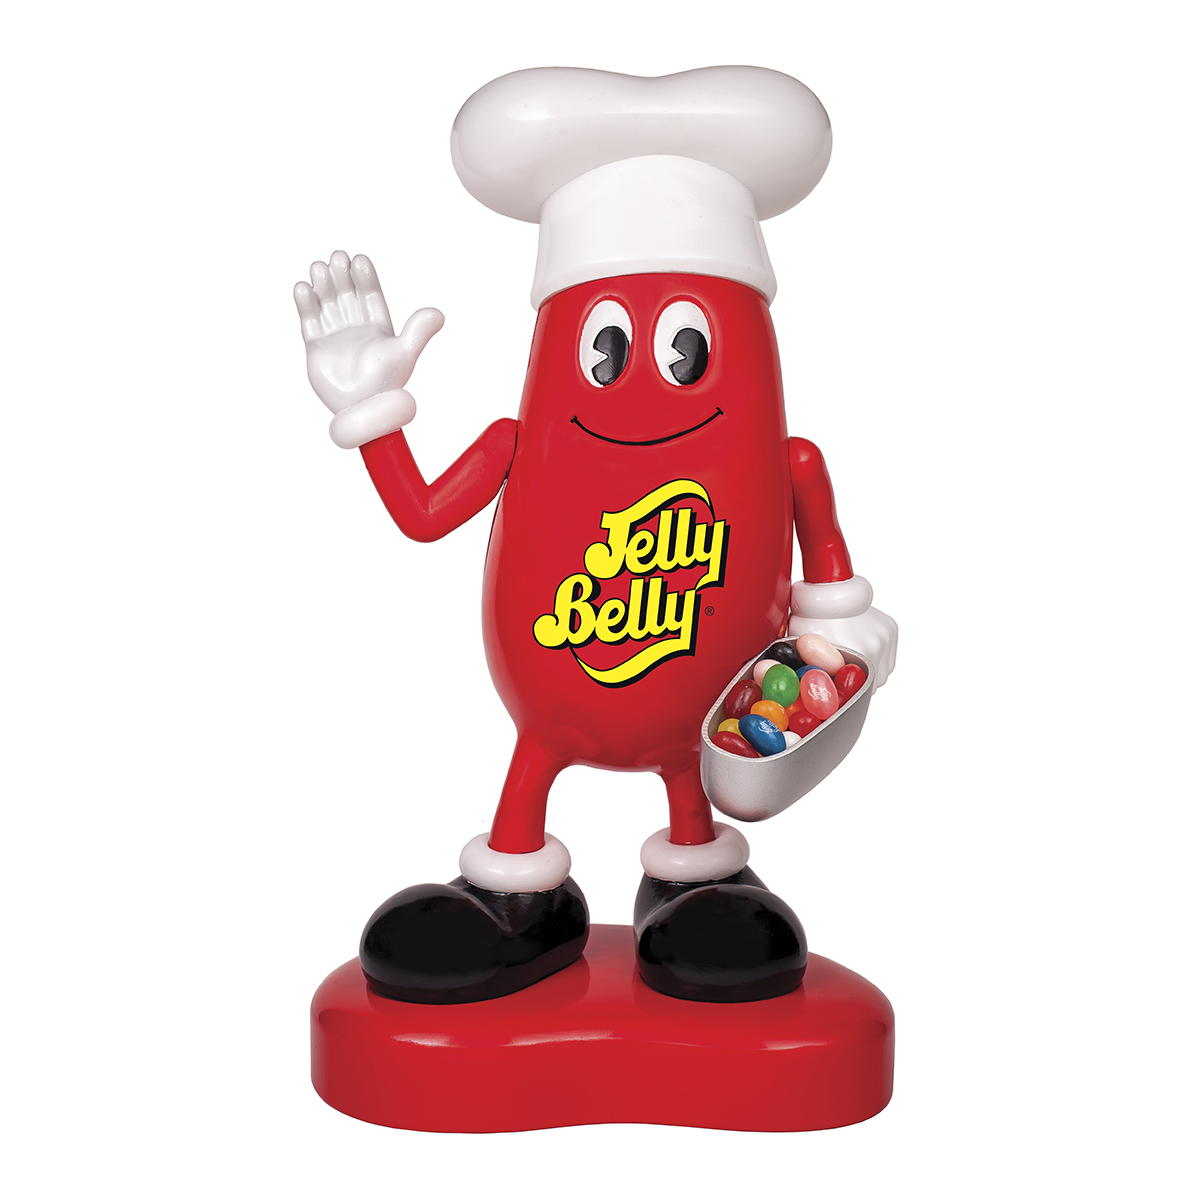 Jelly Bean Candy Dispenser New Jelly Belly Factory Bean Machine Animated Mr 